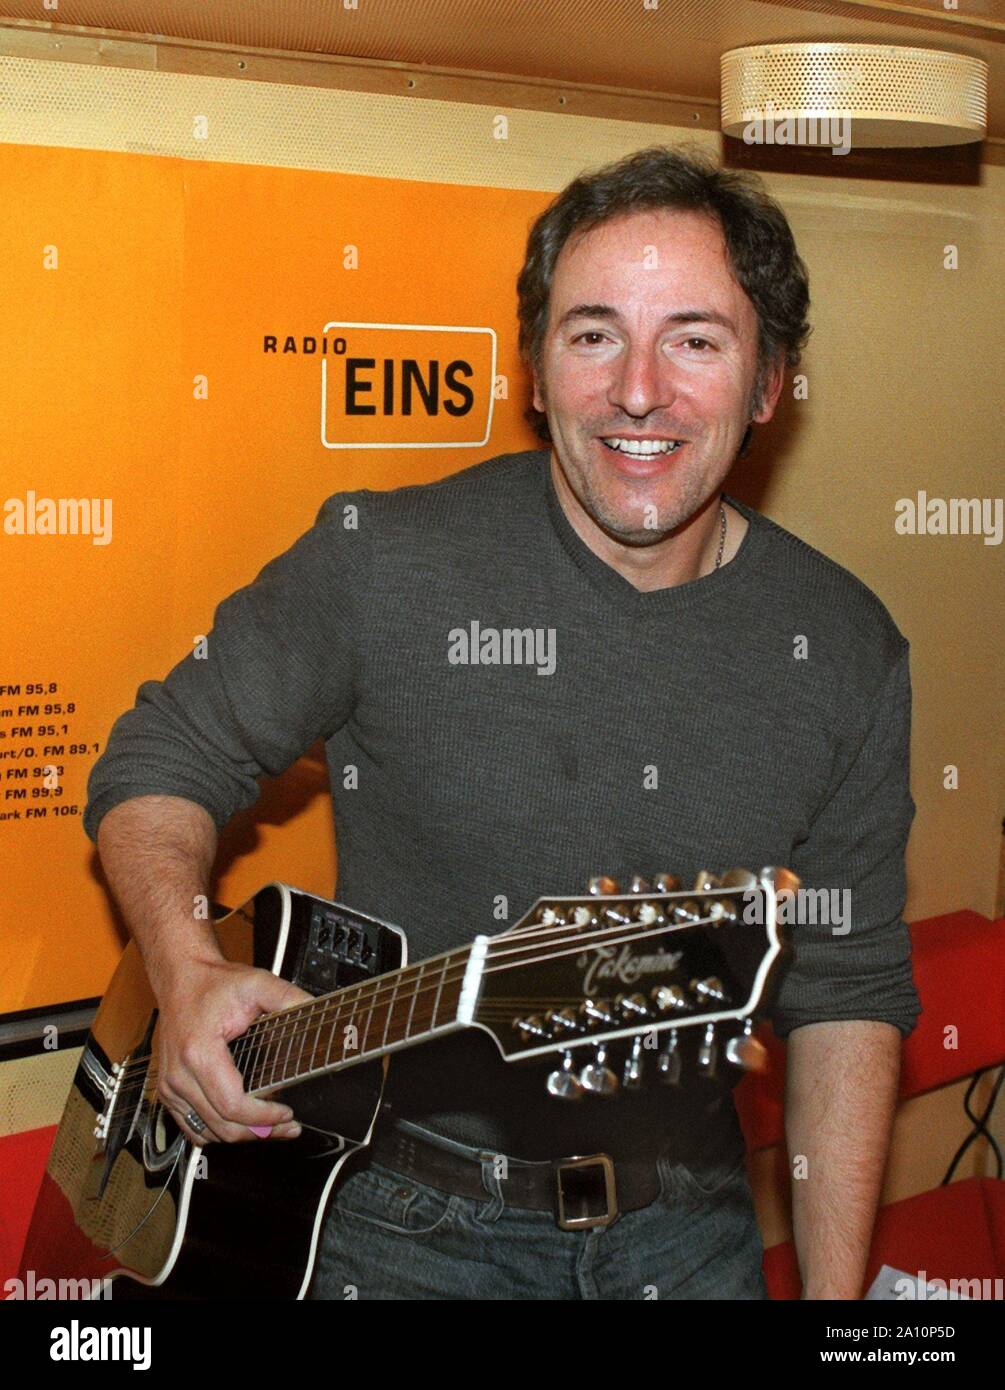 US rock legend Bruce Springsteen made a short side trip to Berlin on  December 7, 1998 during his promotional tour of several European countries  and gives an interview to a radio station.